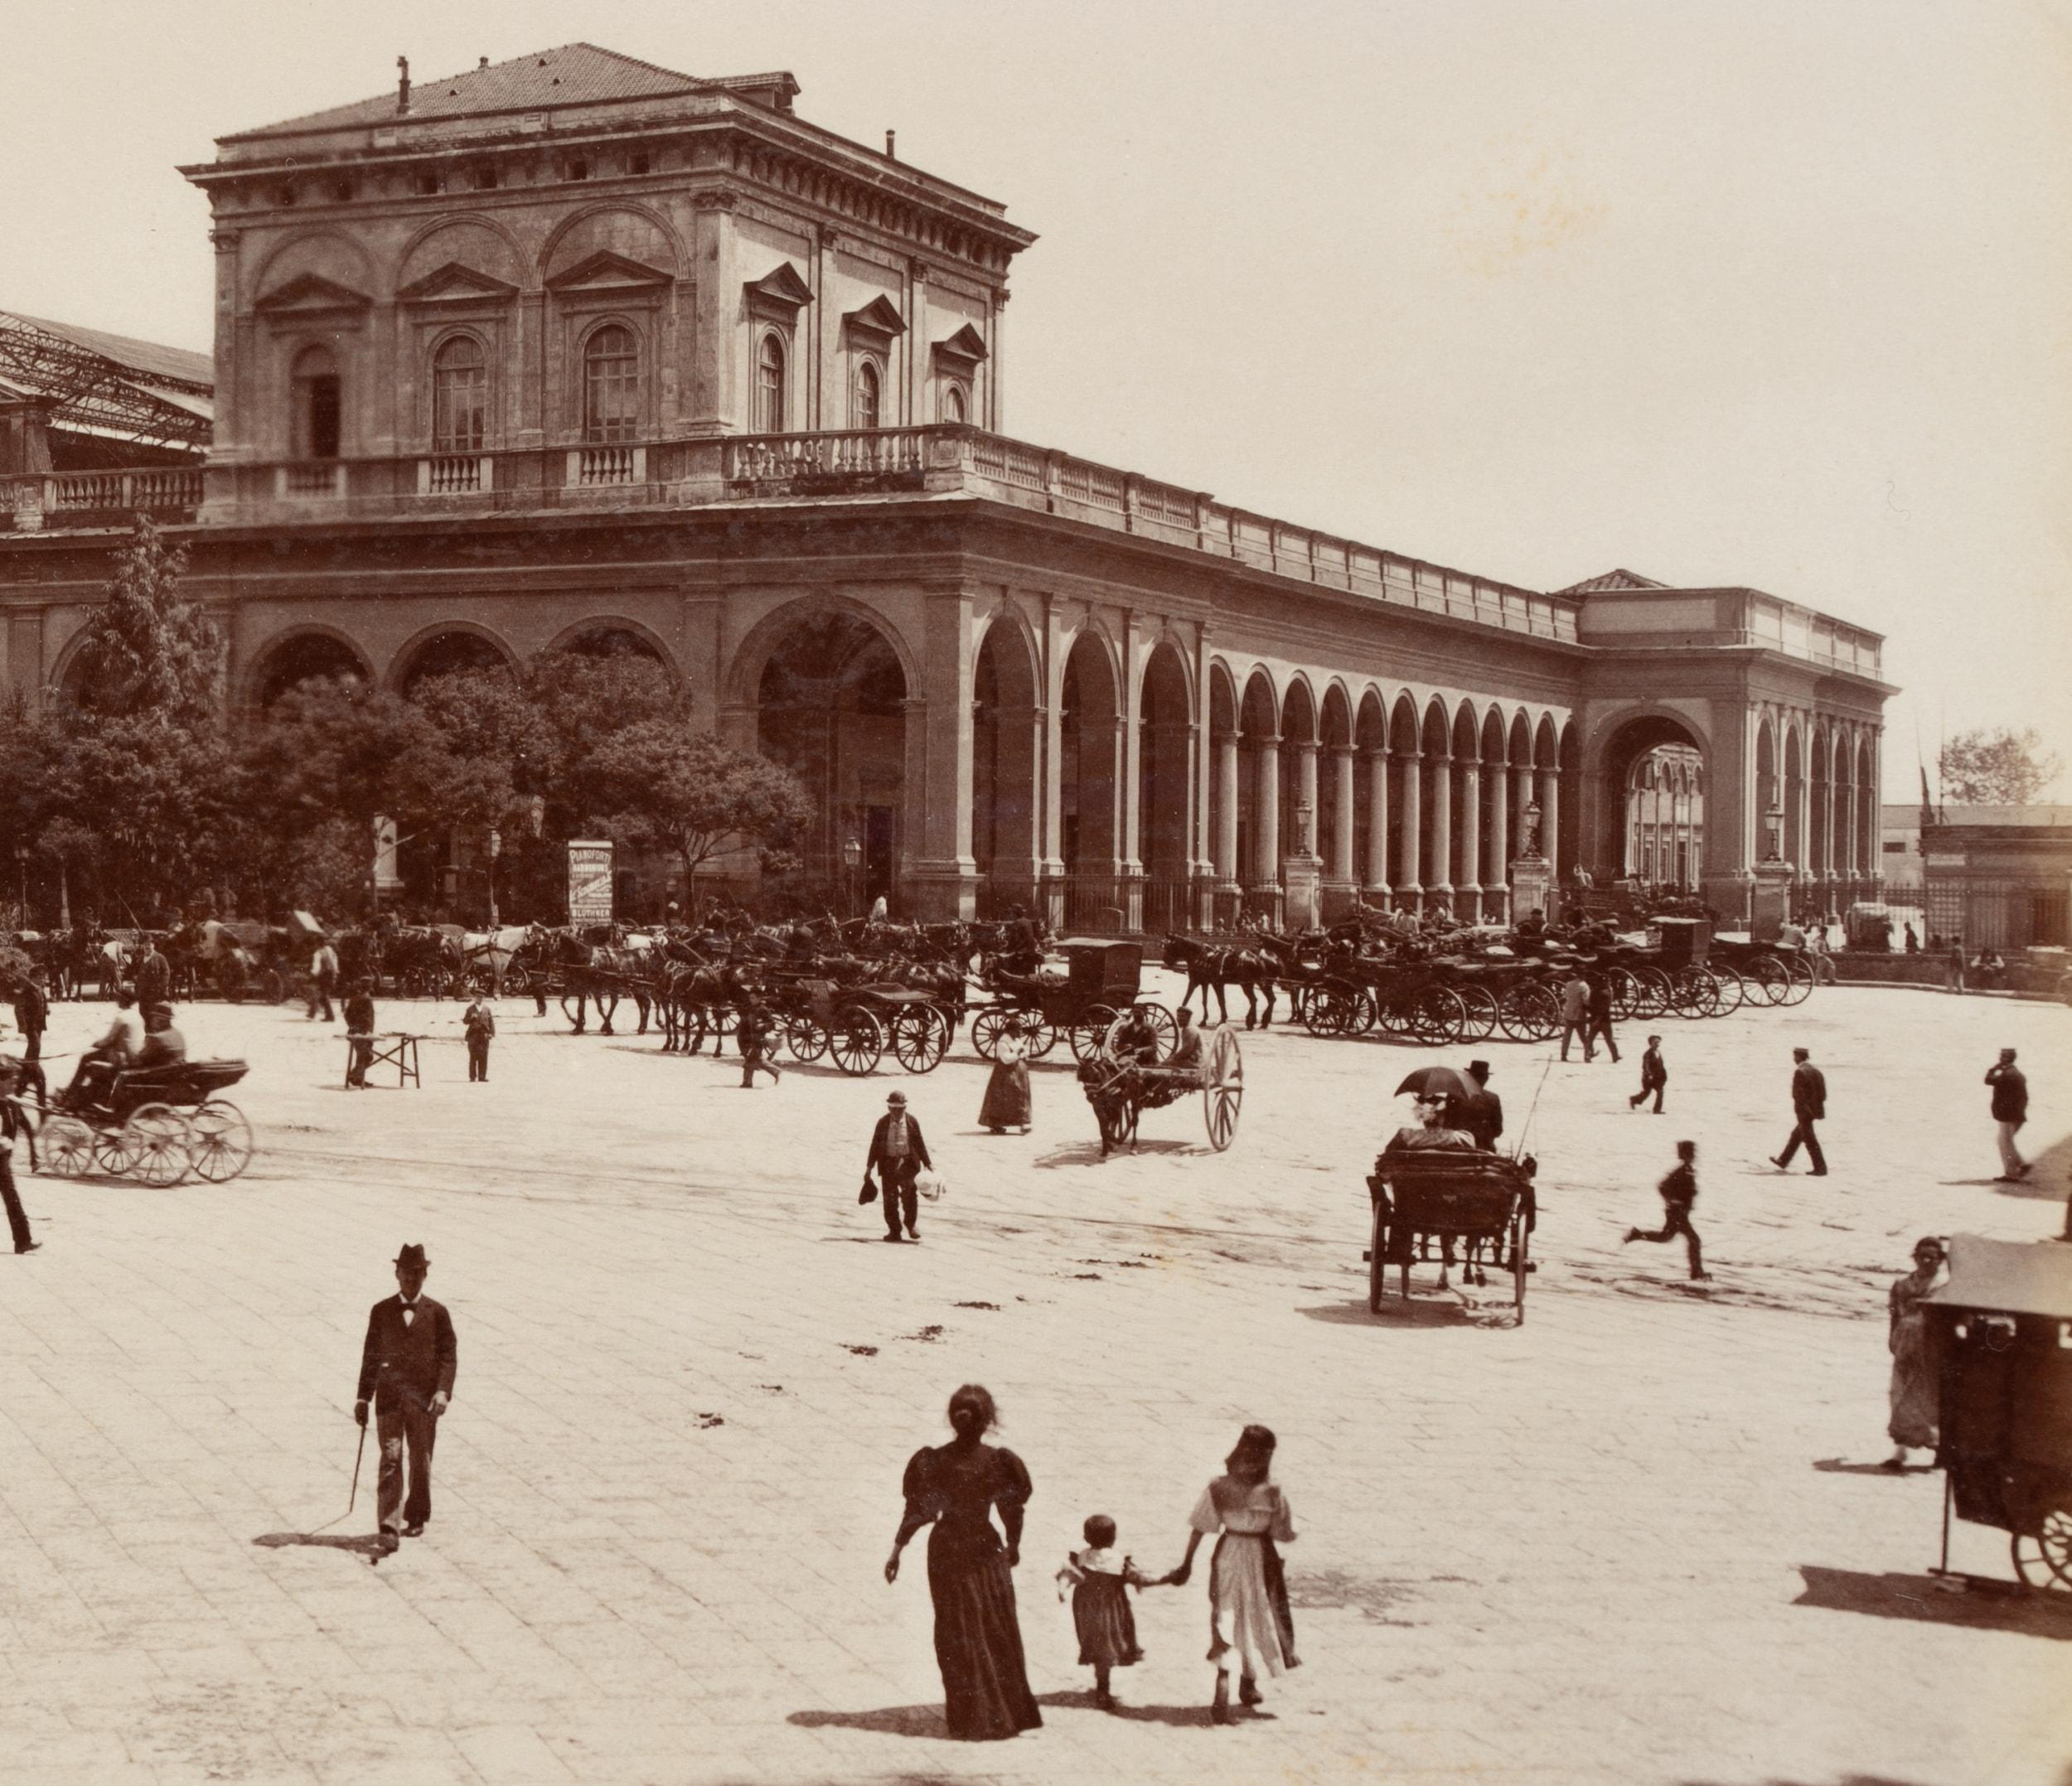 Fratelli Alinari (19th century): La Piazza della Stazione View over the busy square and the old reception building of Naples Central Station with carriages and passers-by, c. 1880, albumen paper print

Technique: albumen paper print

Inscription: